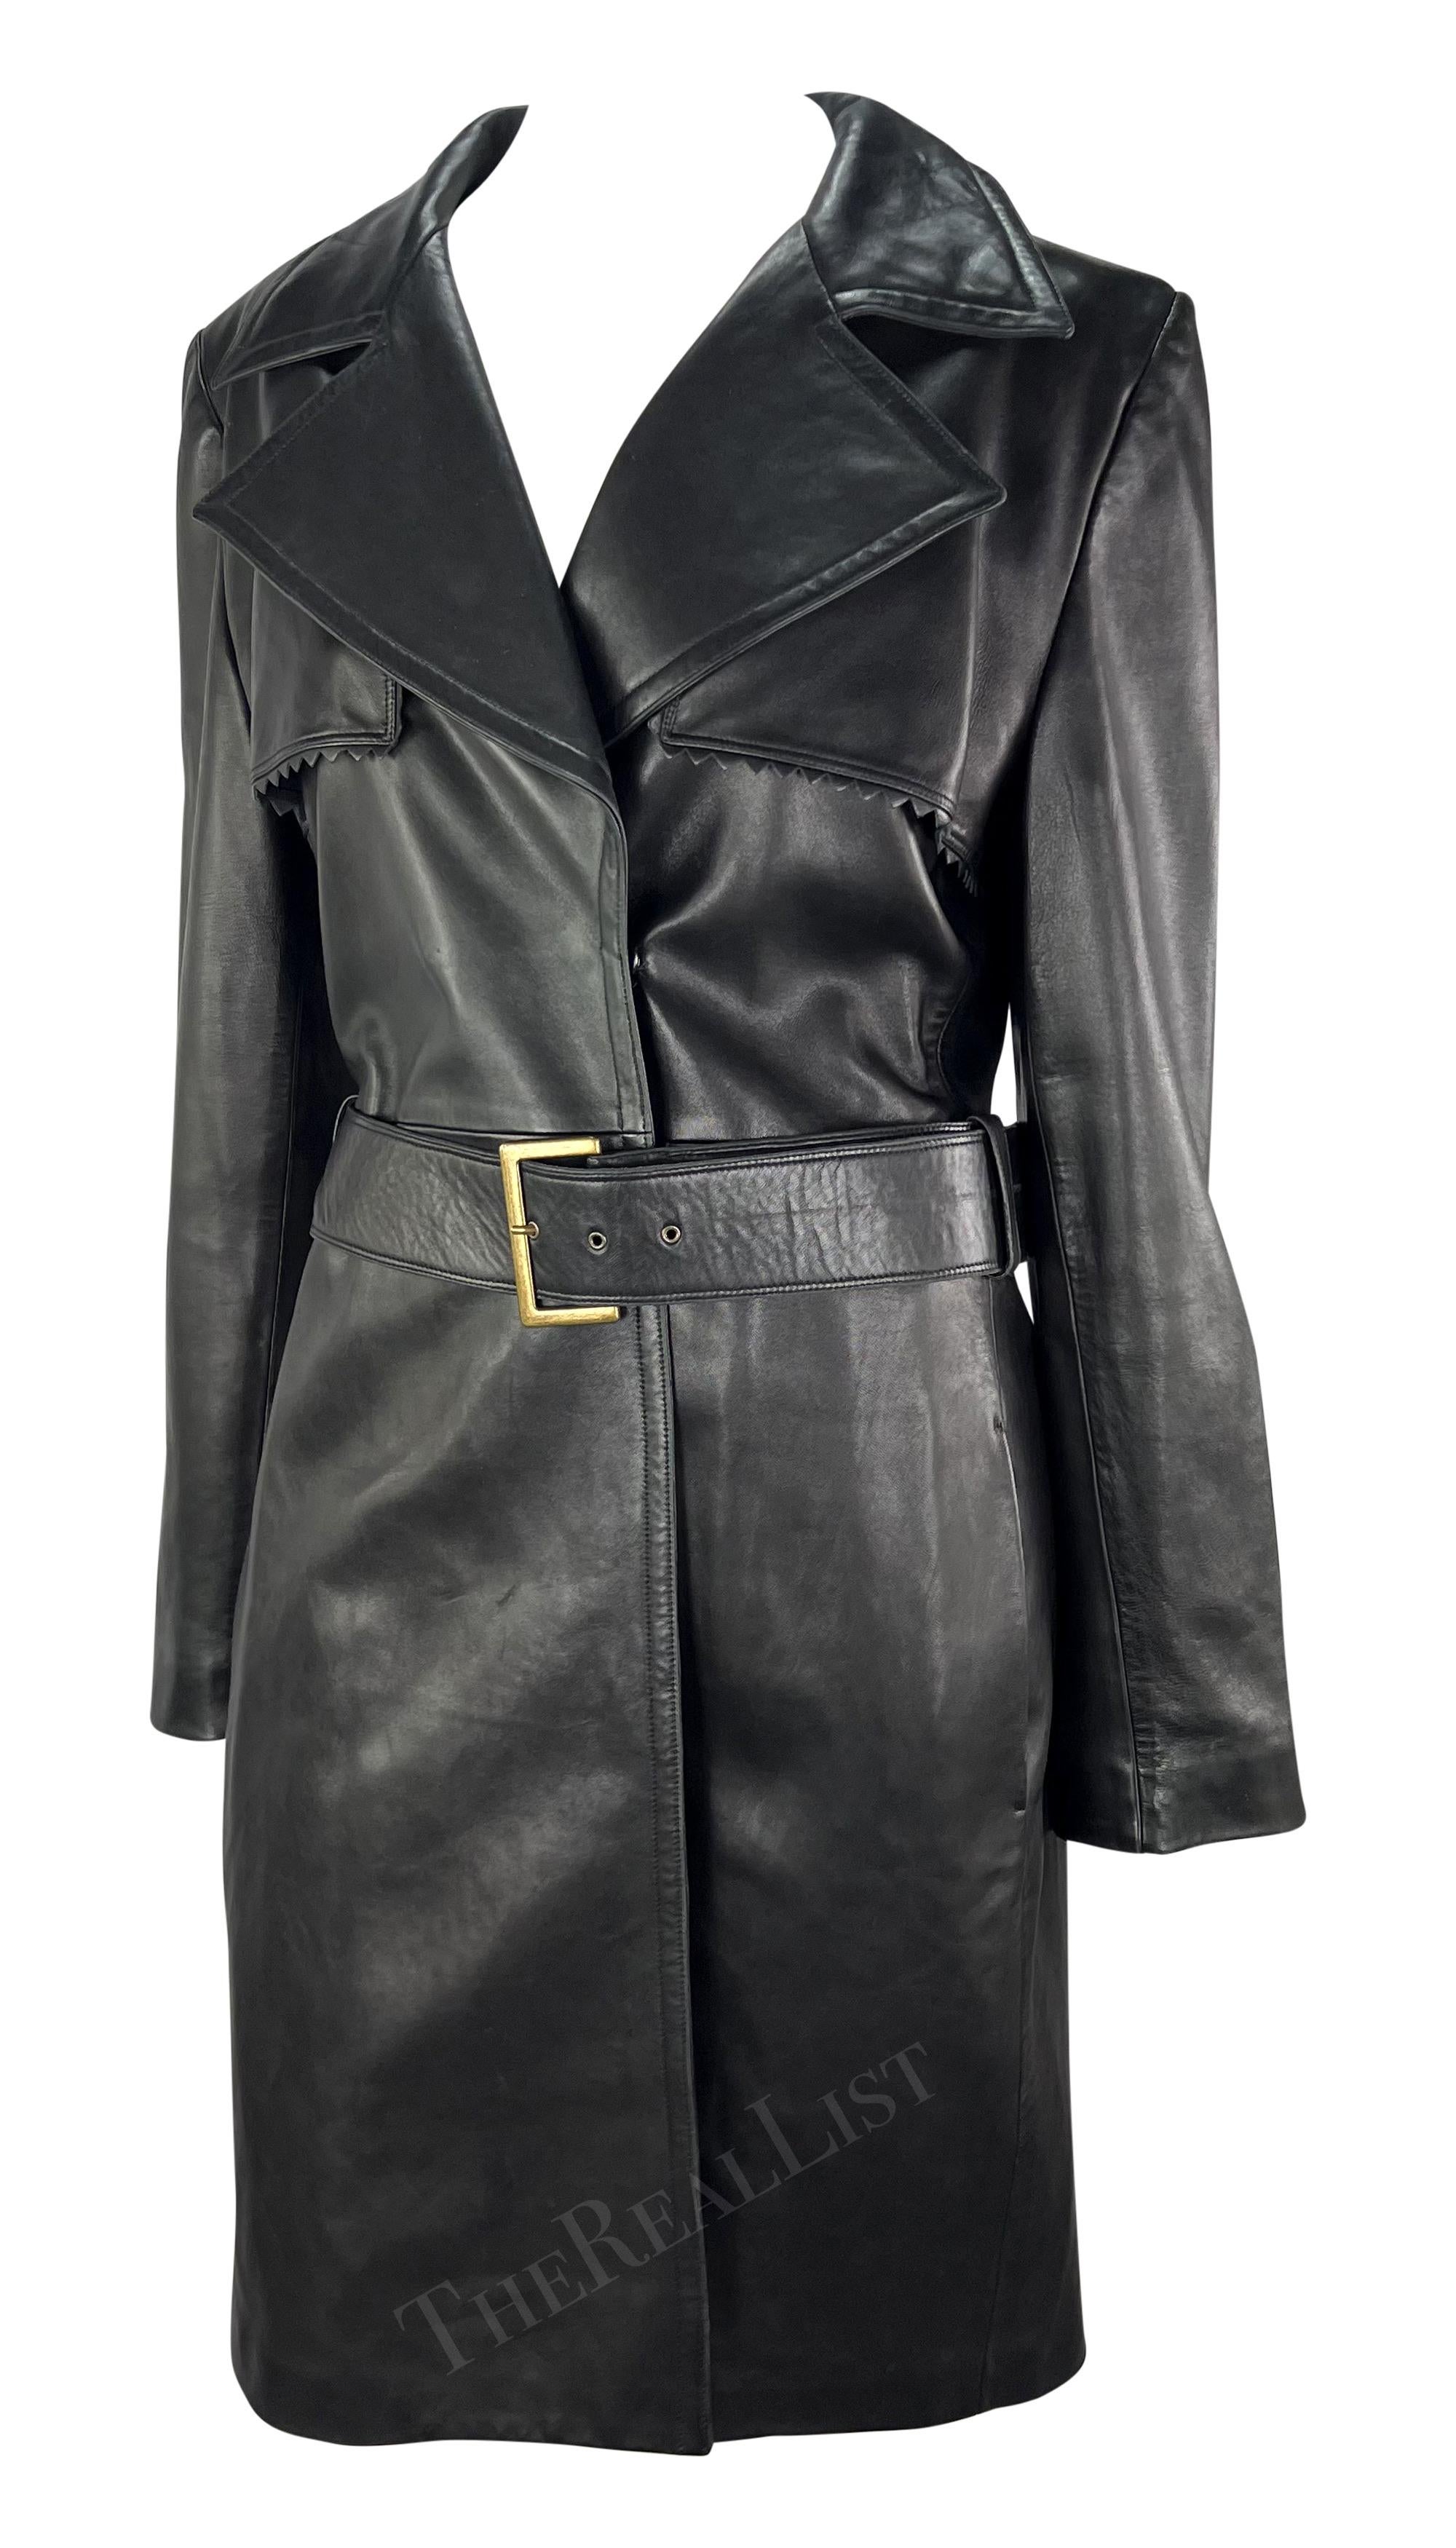 From the Fall/Winter 2002 collection, this Gianni Versace coat, designed by Donatella Versace, is constructed entirely of black leather. Unique saw-tooth shaped leather trim makes this a stand out coat. A must-have closet essential, this luxurious